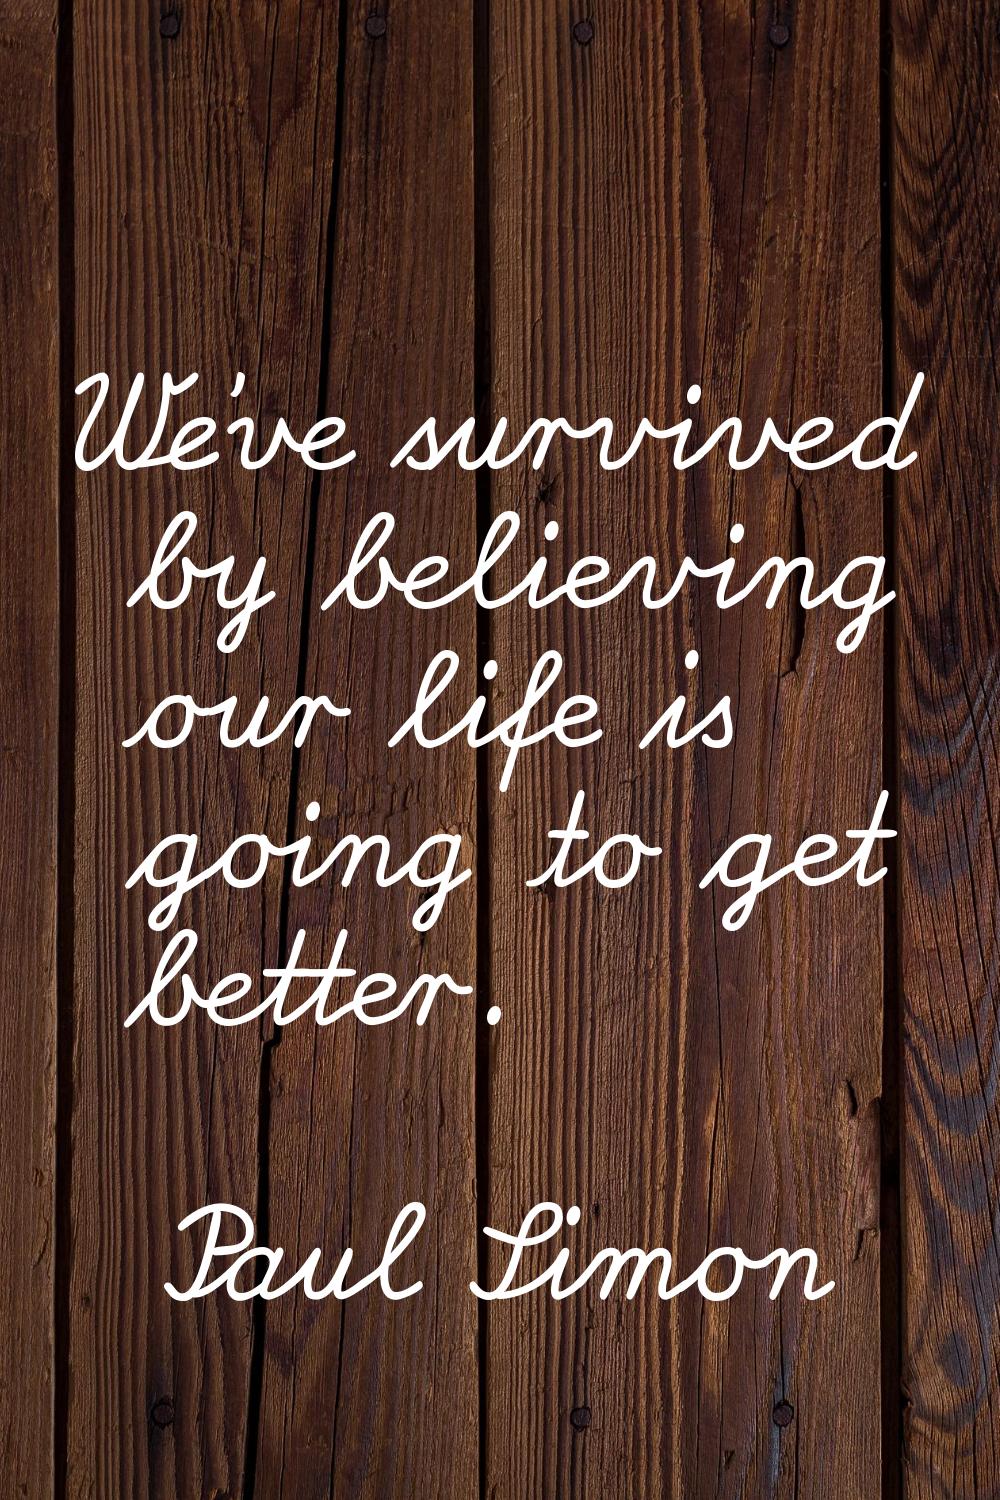 We've survived by believing our life is going to get better.